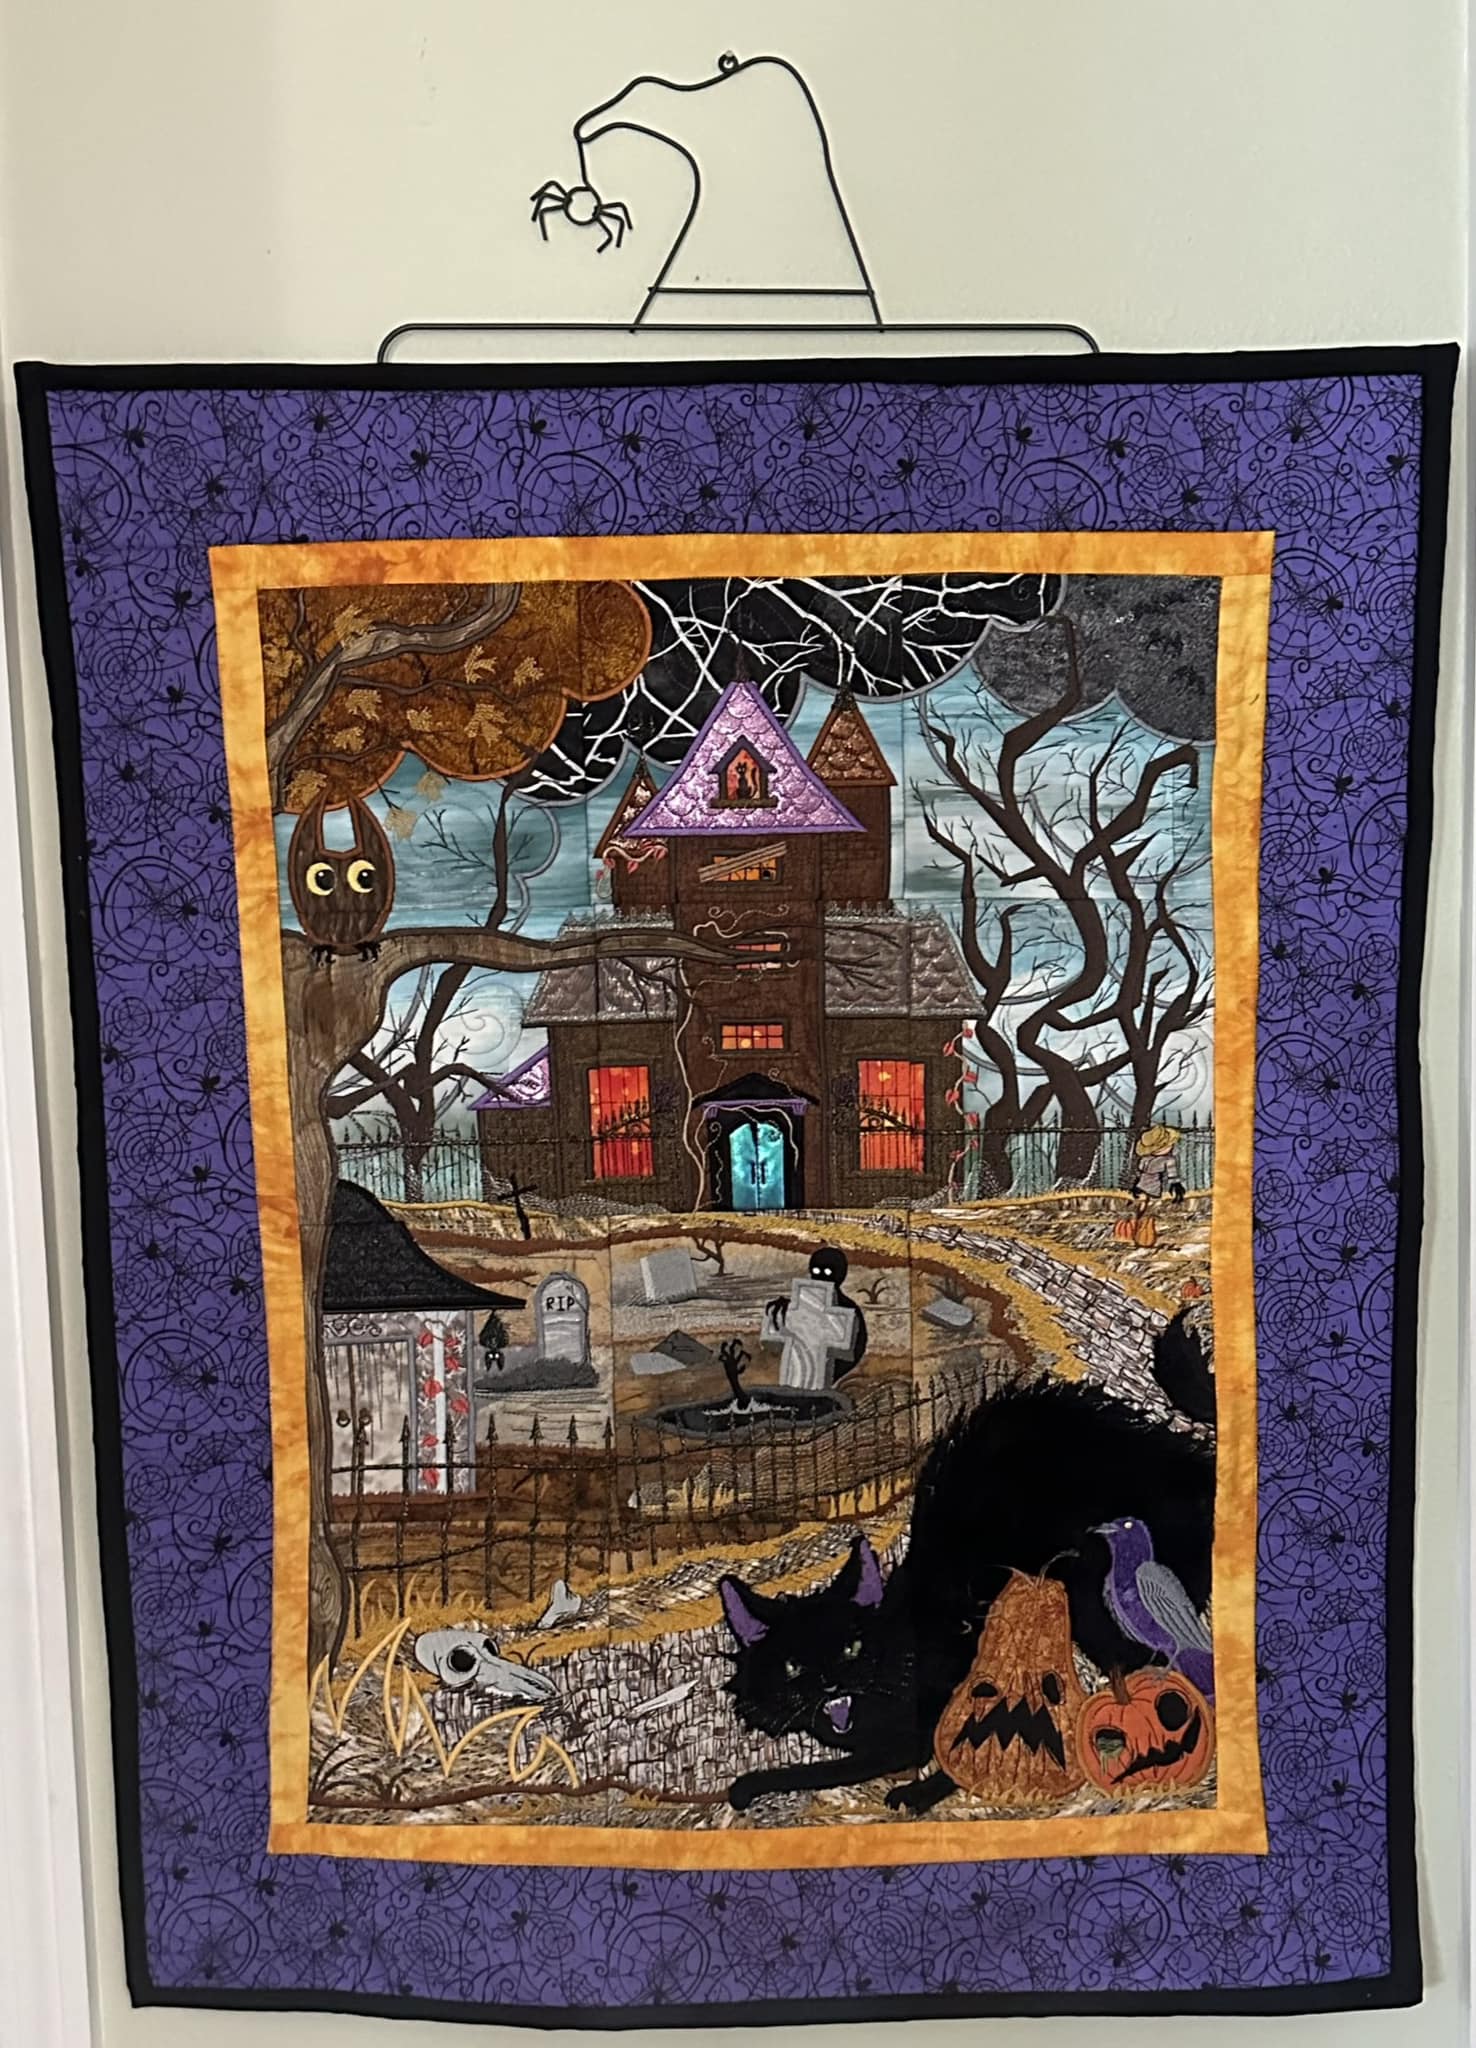 A Haunting Scene Mini Quilt 4x4 5x5 6x6 7x7 8x8 - Sweet Pea In The Hoop Machine Embroidery Design